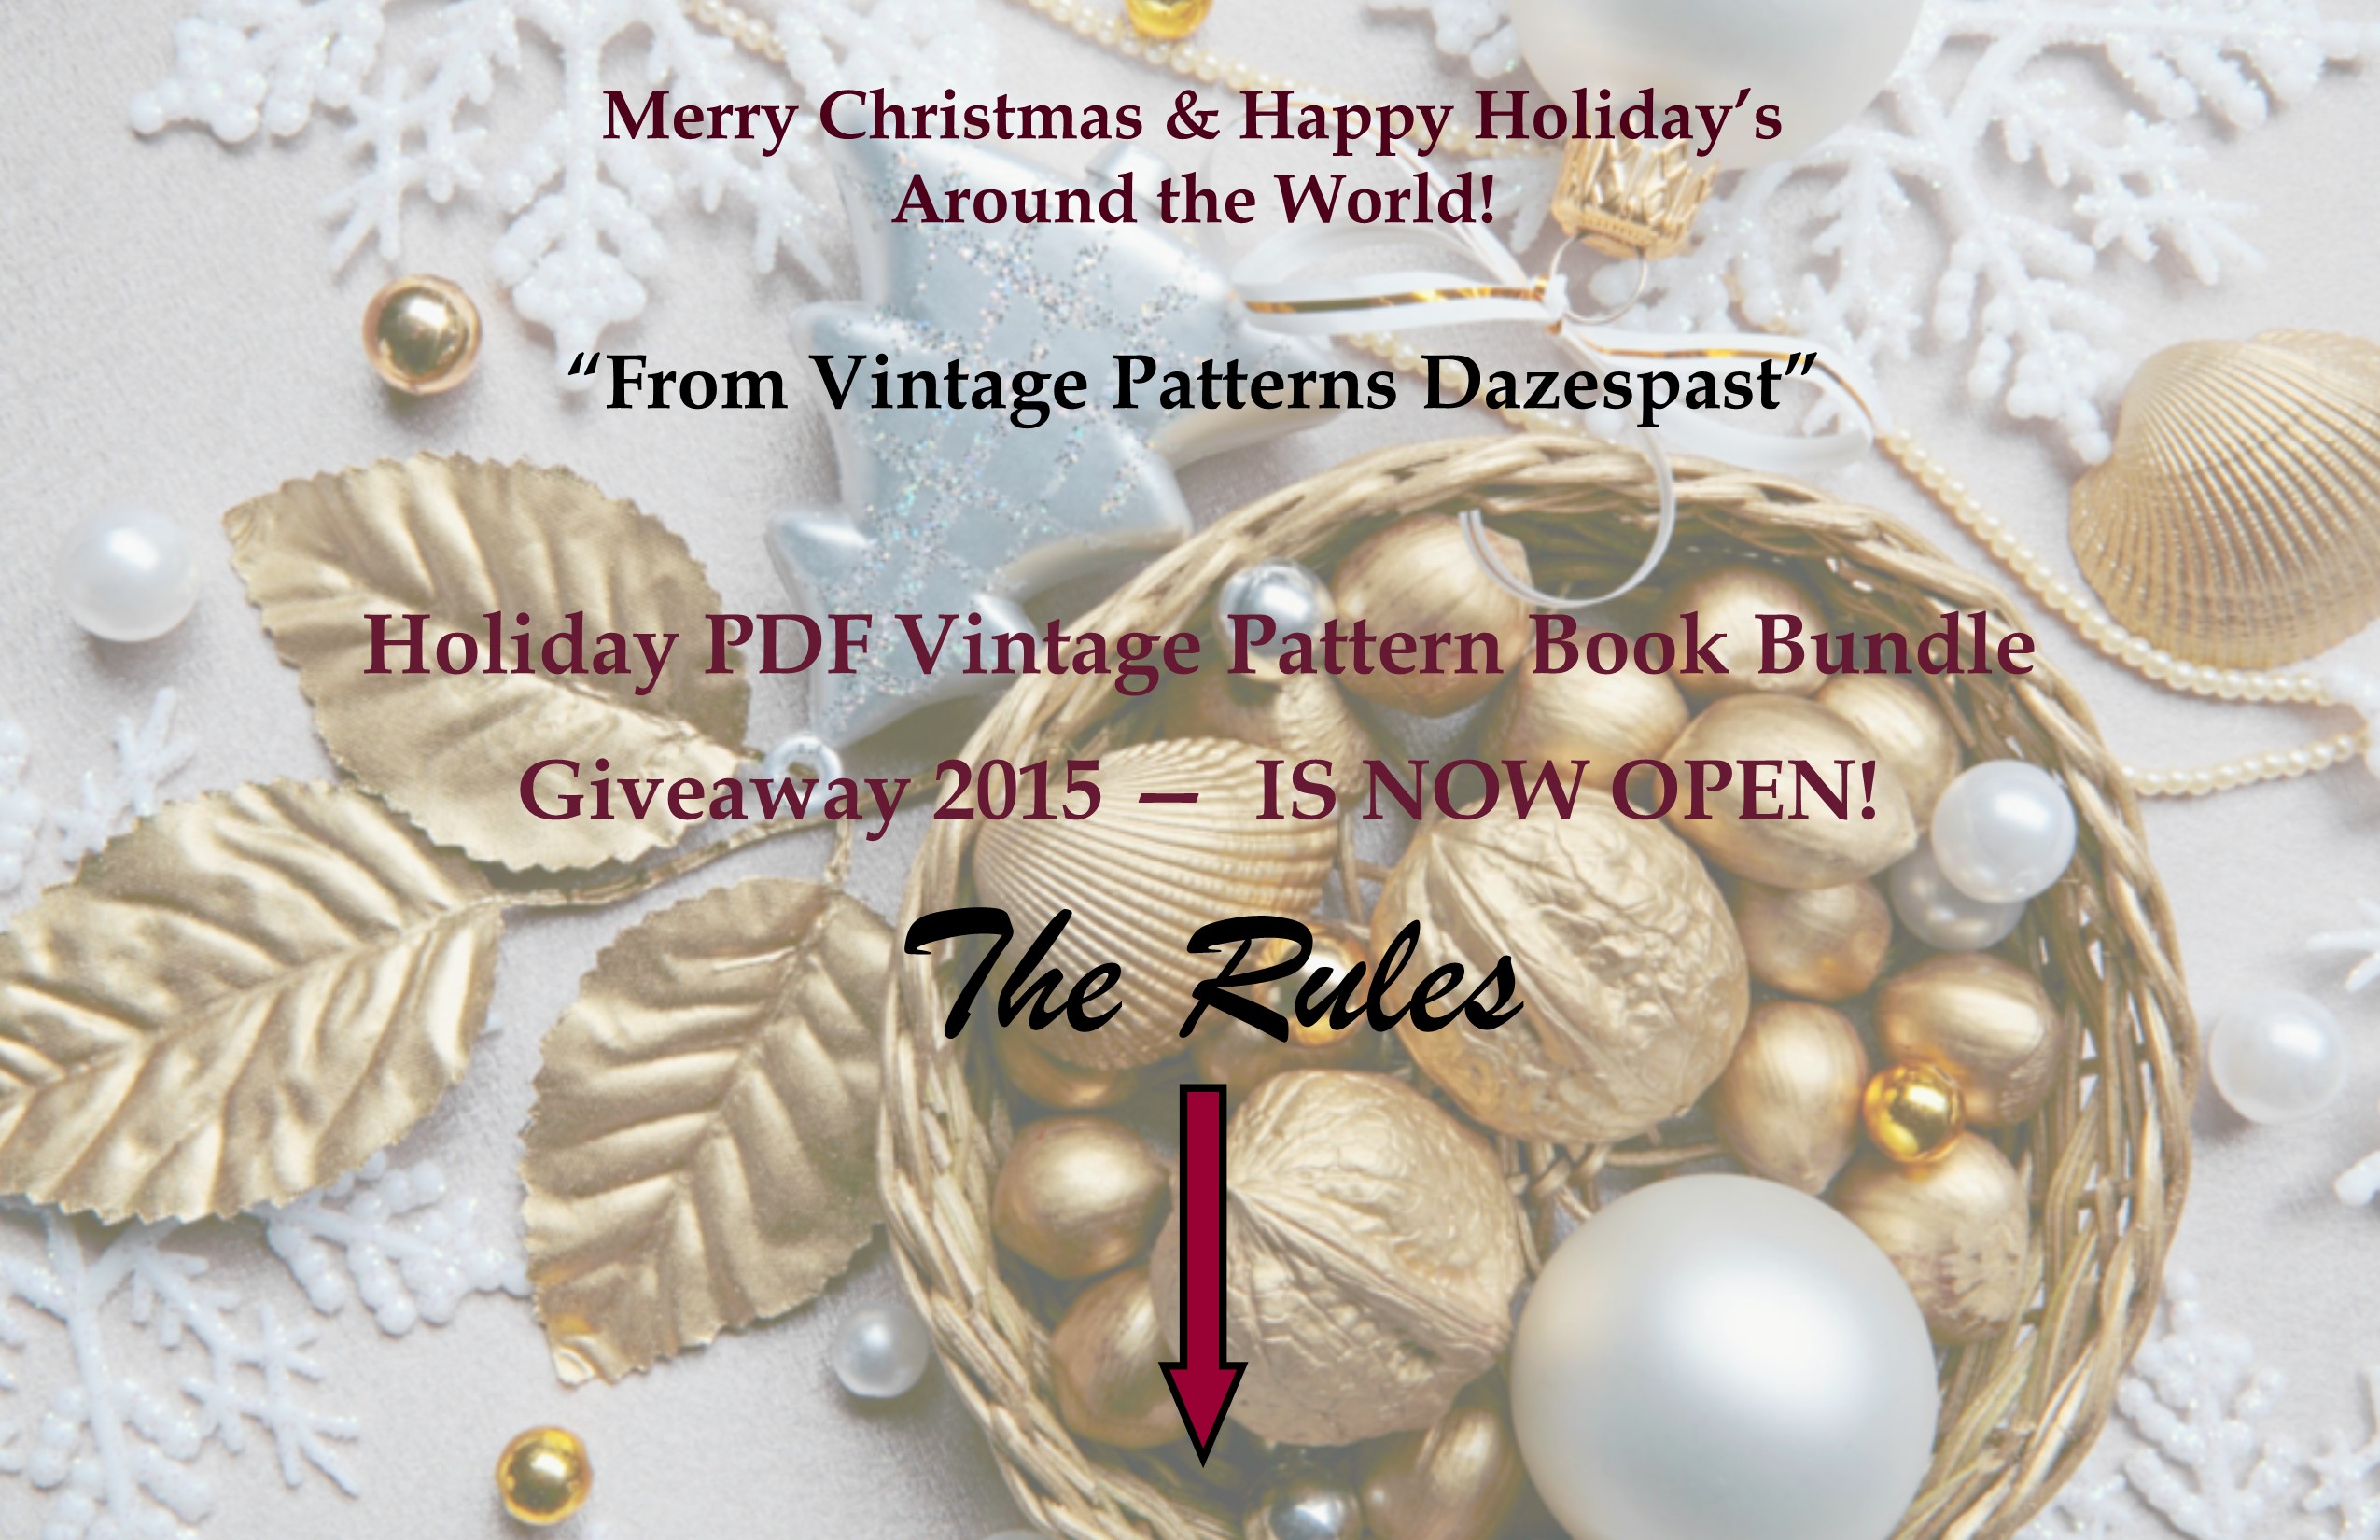 Holiday PDF Vintage Pattern Book Giveaway 2015 IS NOW OPEN!